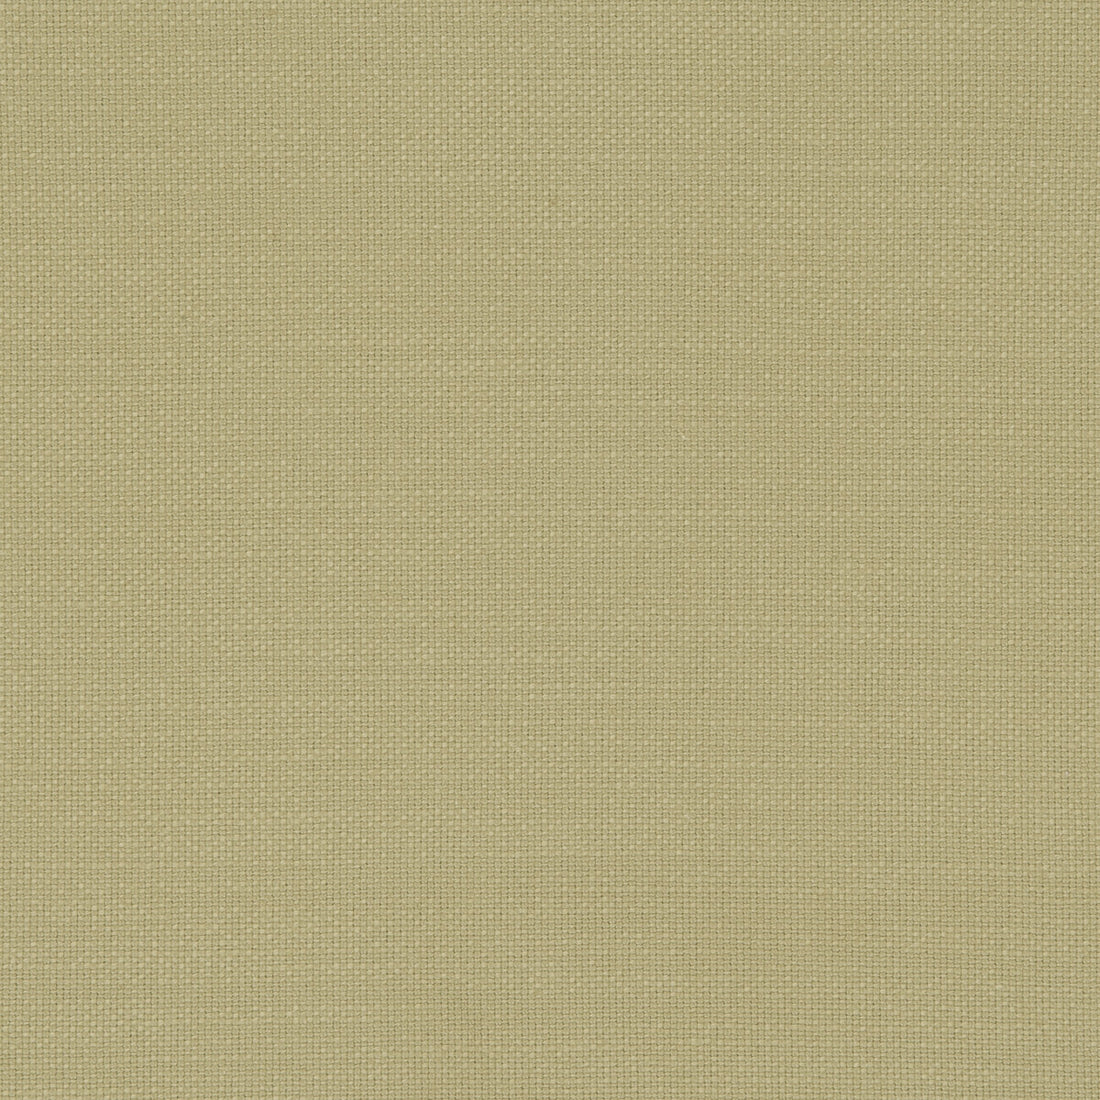 Nantucket fabric in hemp color - pattern F0594/25.CAC.0 - by Clarke And Clarke in the Clarke &amp; Clarke Nantucket collection